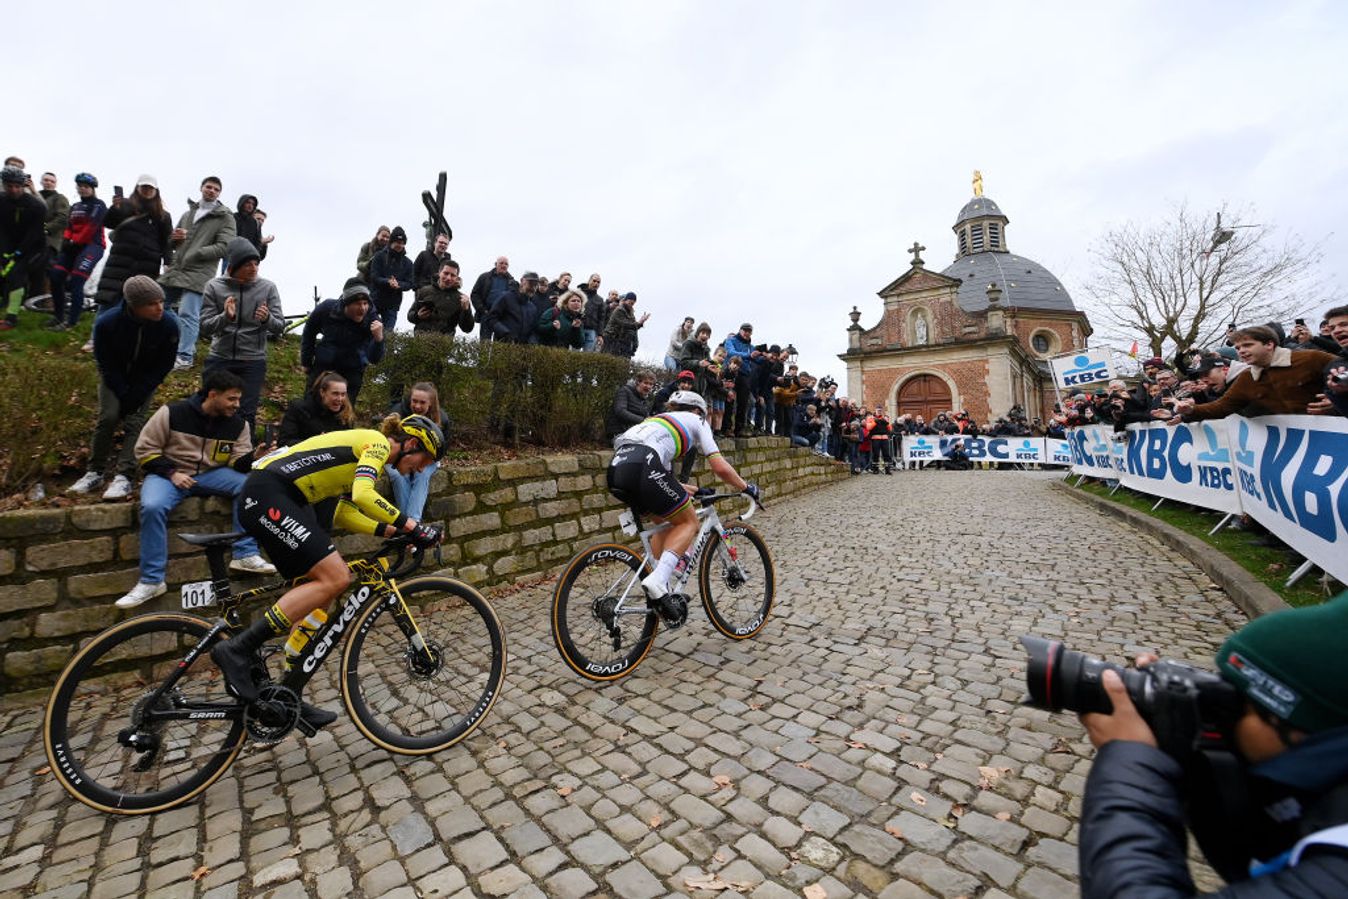 The Omloop heads over the famous Muur in its finale